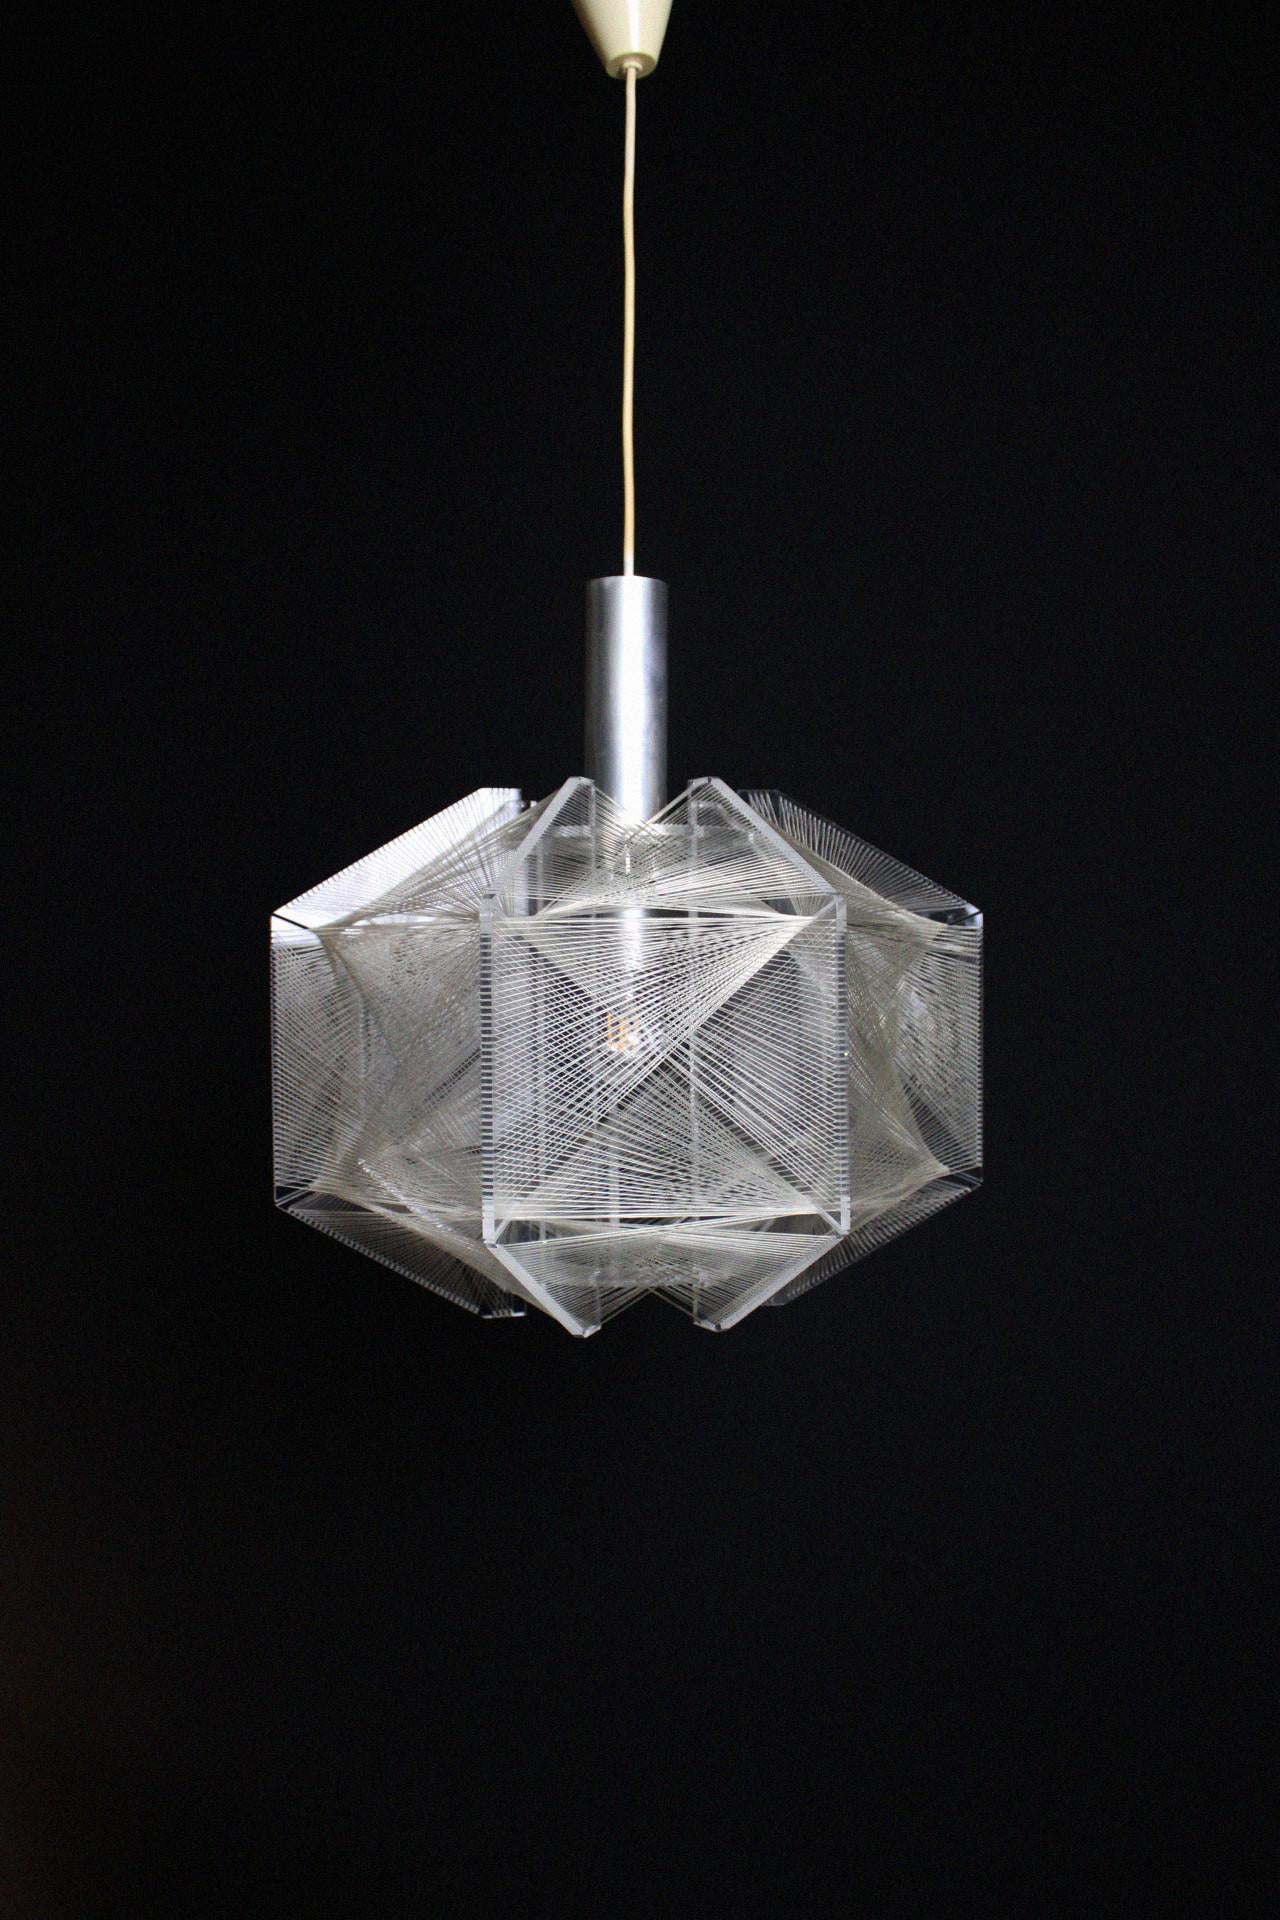 This timeless and beautiful pendant lamp is a design from the 1970s, and designed by Paul Secon for the German manufacturer, Sompex, a German company that to this day makes lamps in high quality. The lamp is in perfect, original condition with some